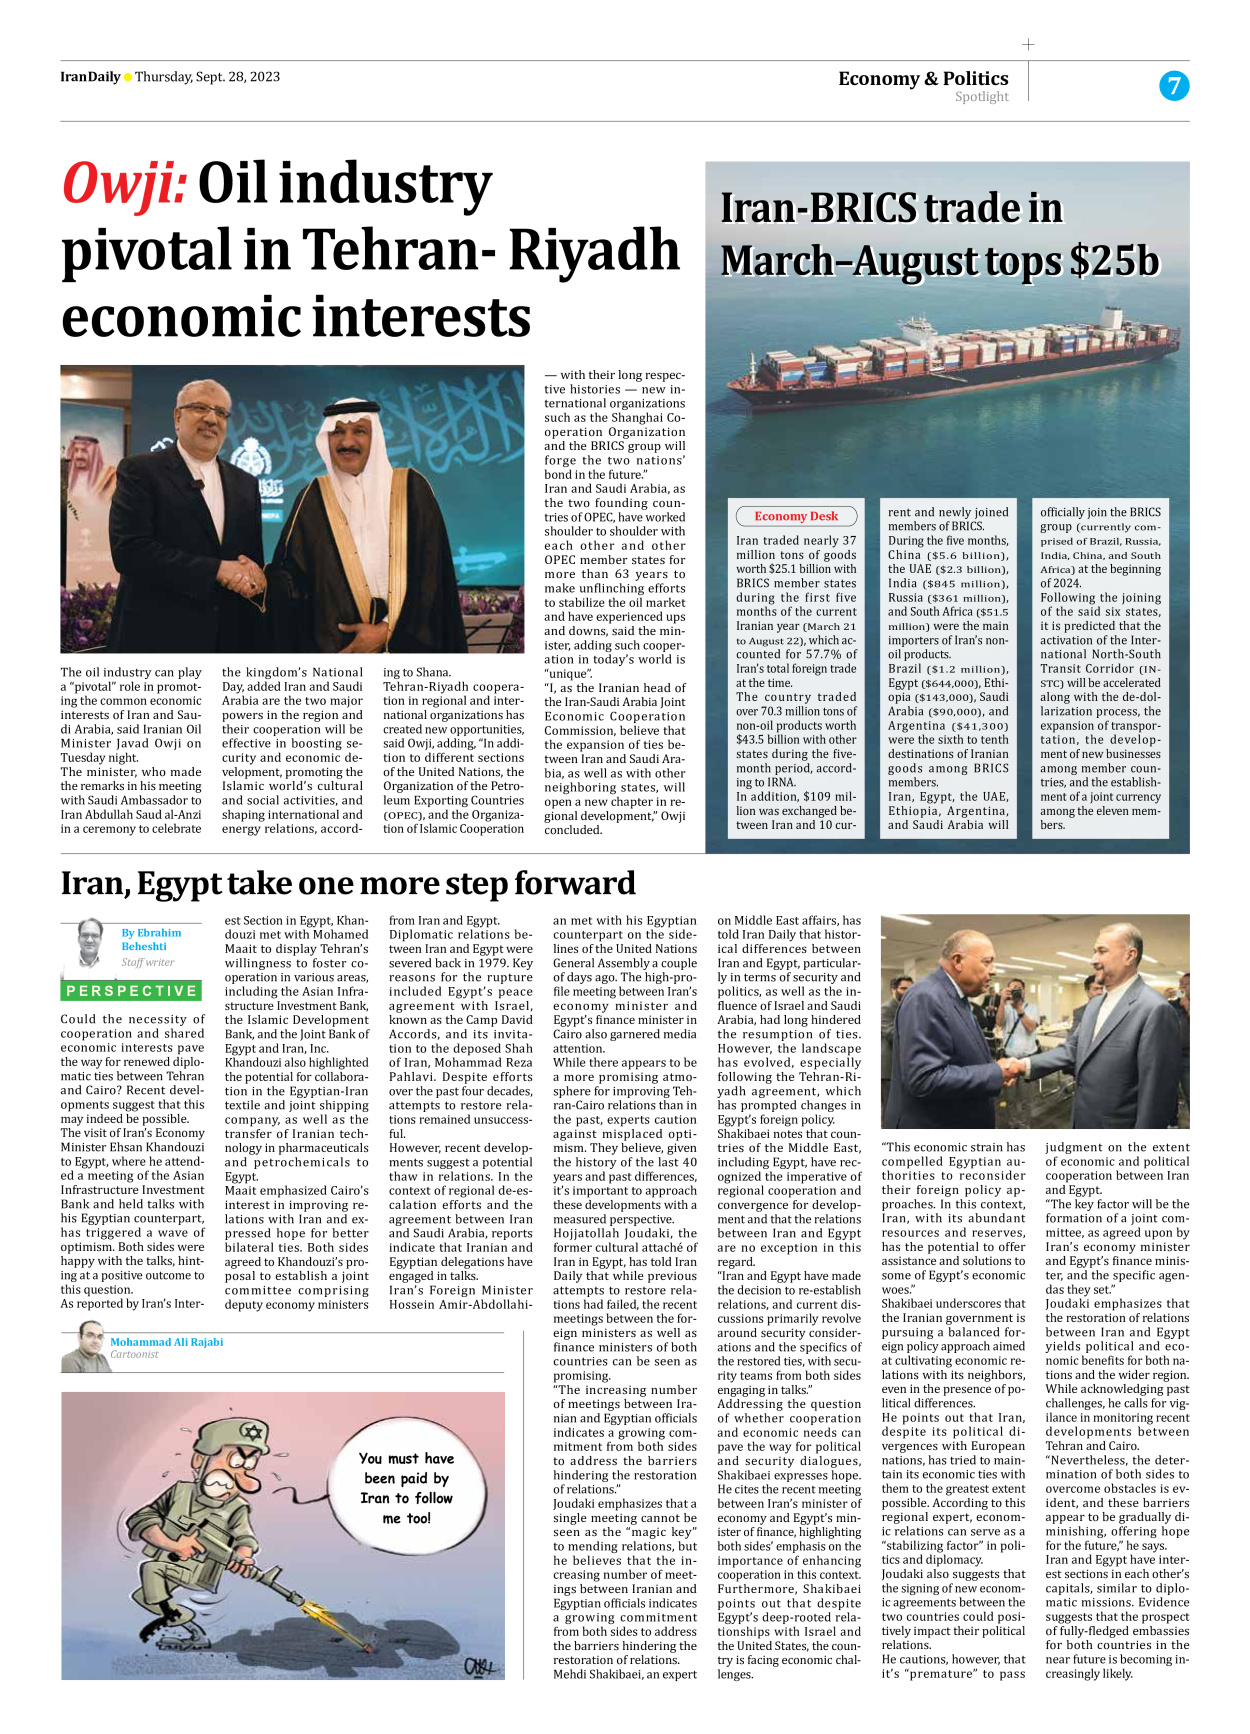 Iran Daily - Number Seven Thousand Three Hundred and Ninety Five - 28 September 2023 - Page 7